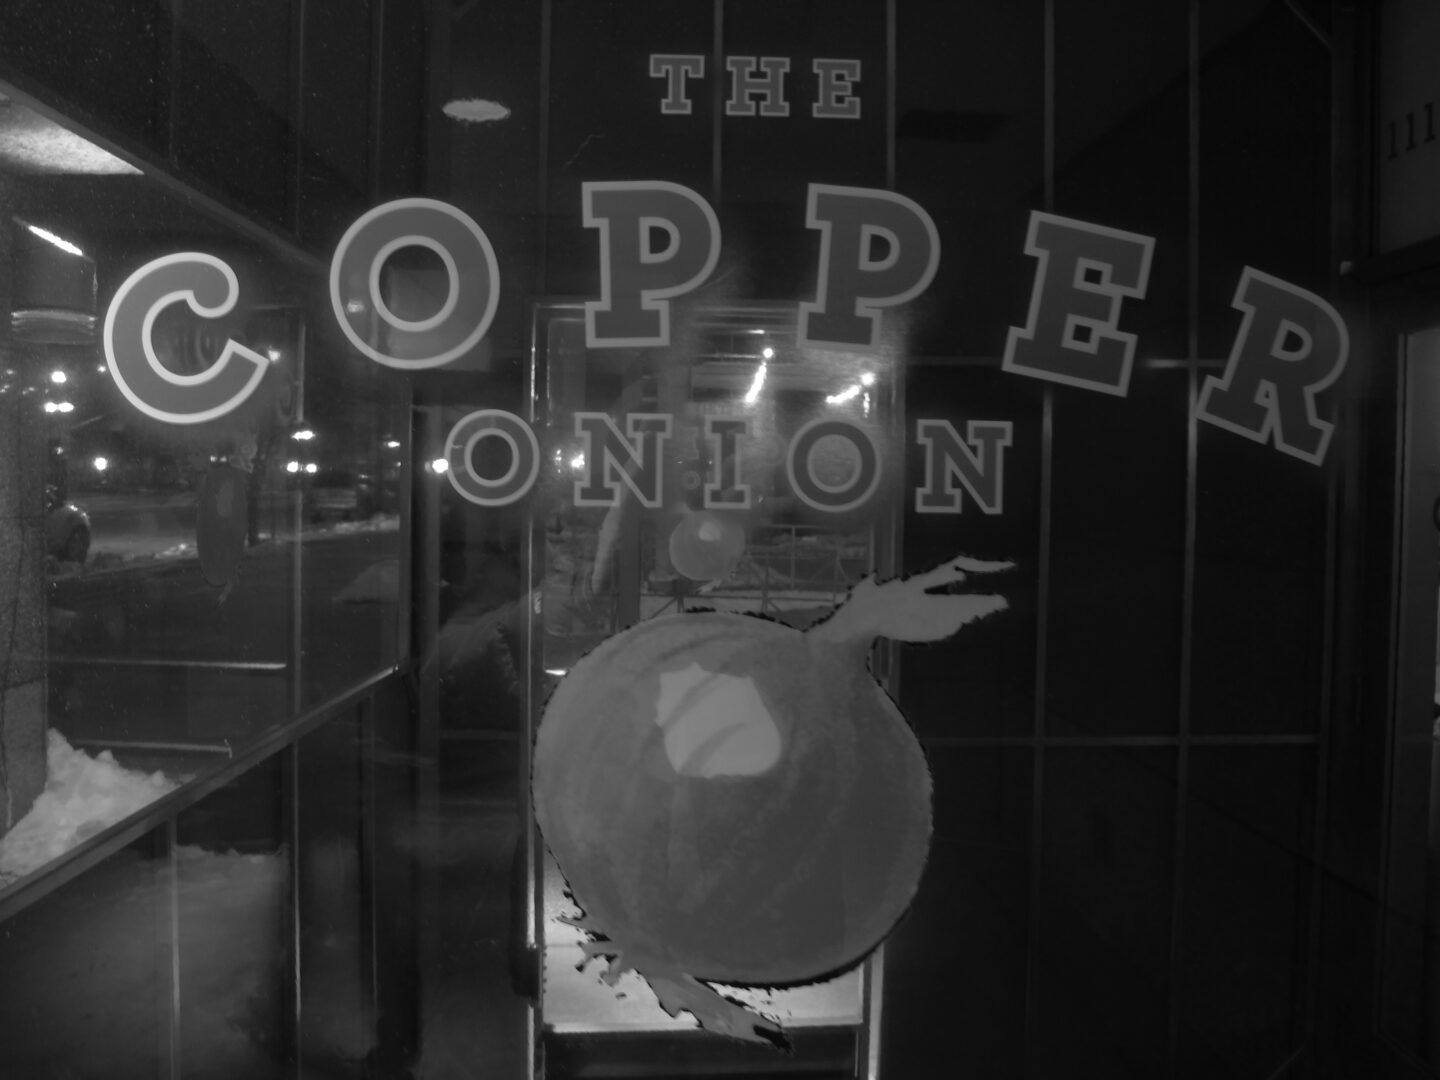 A black and white photo of the copper onion.